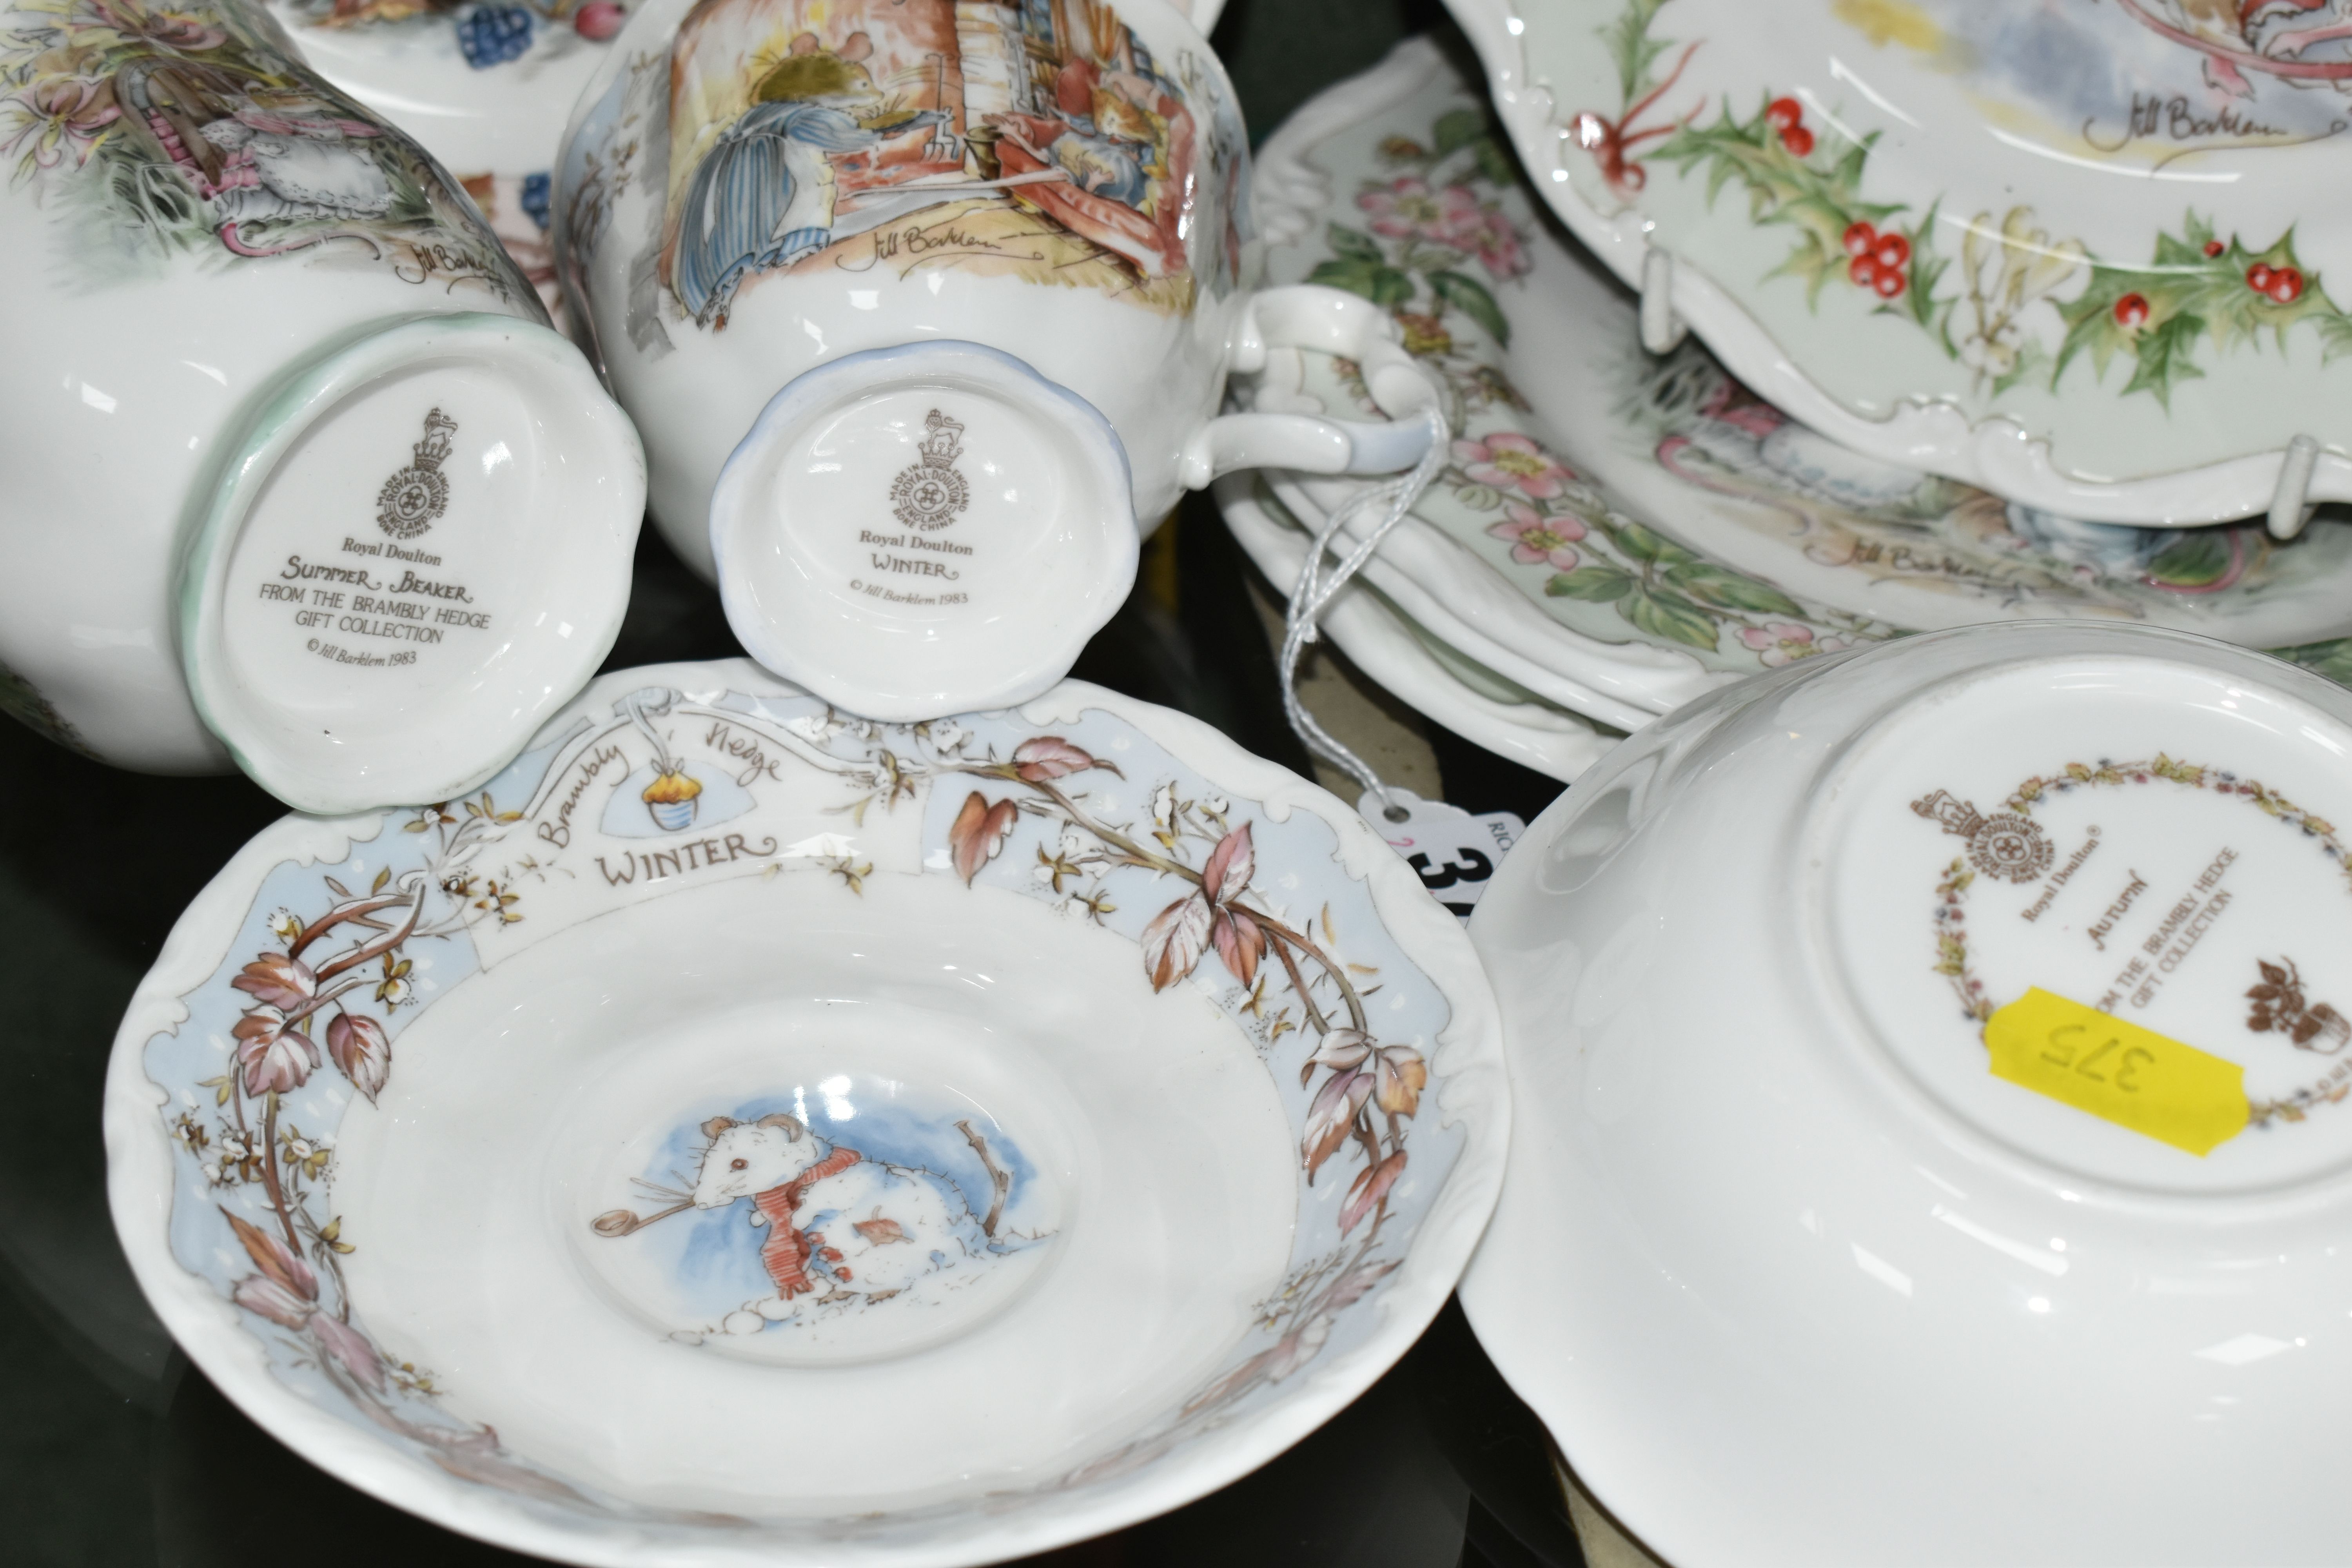 A GROUP OF ROYAL DOULTON 'BRAMBLY HEDGE' TEA WARE, comprising a 'Summer' mug, a 'Winter' teacup - Image 6 of 6